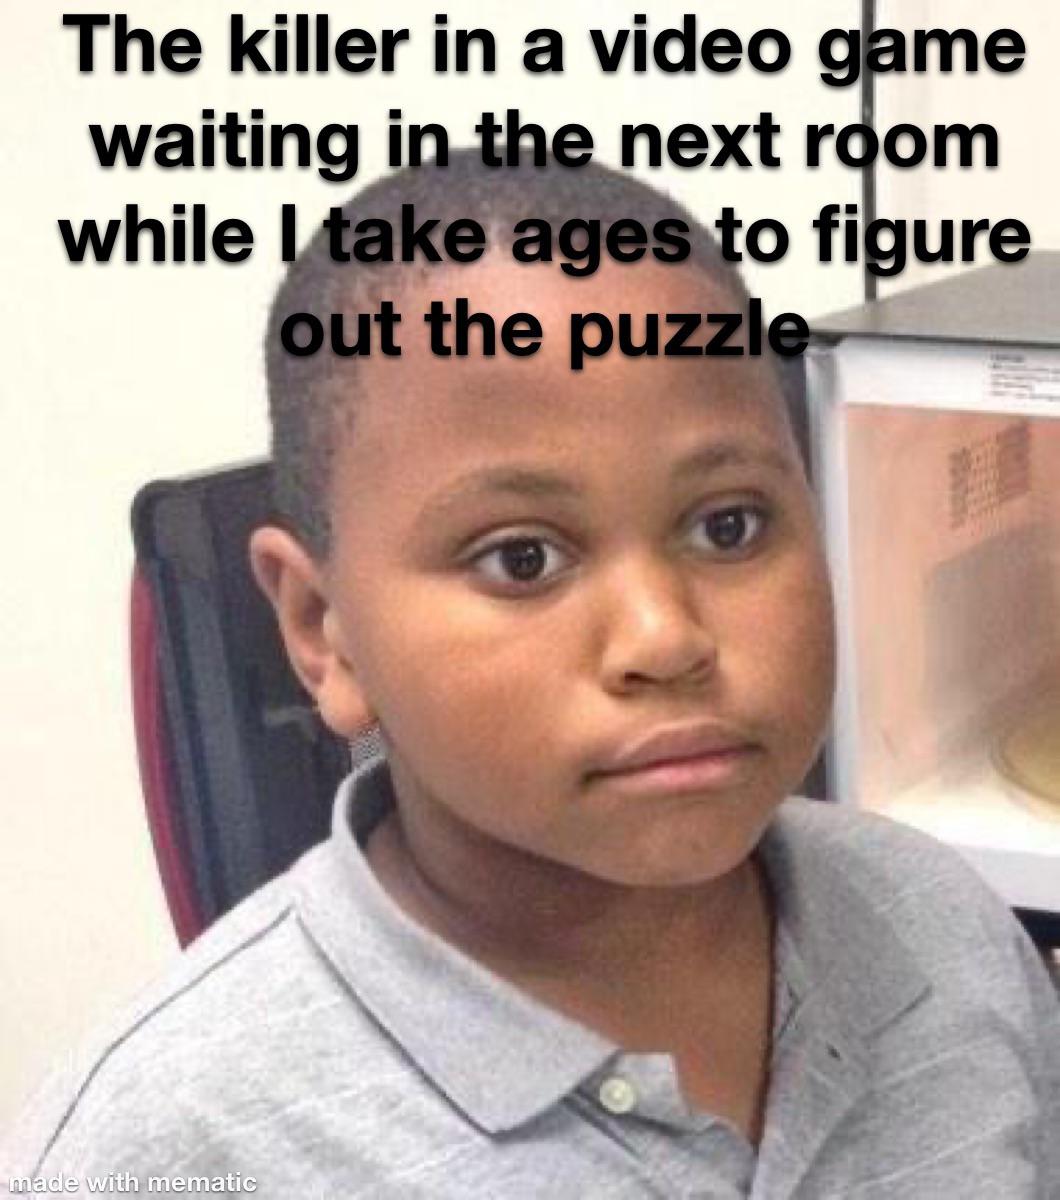 funny memes - dank memes - u realize meme - The killer in a video game waiting in the next room while I take ages to figure out the puzzle made with mematic